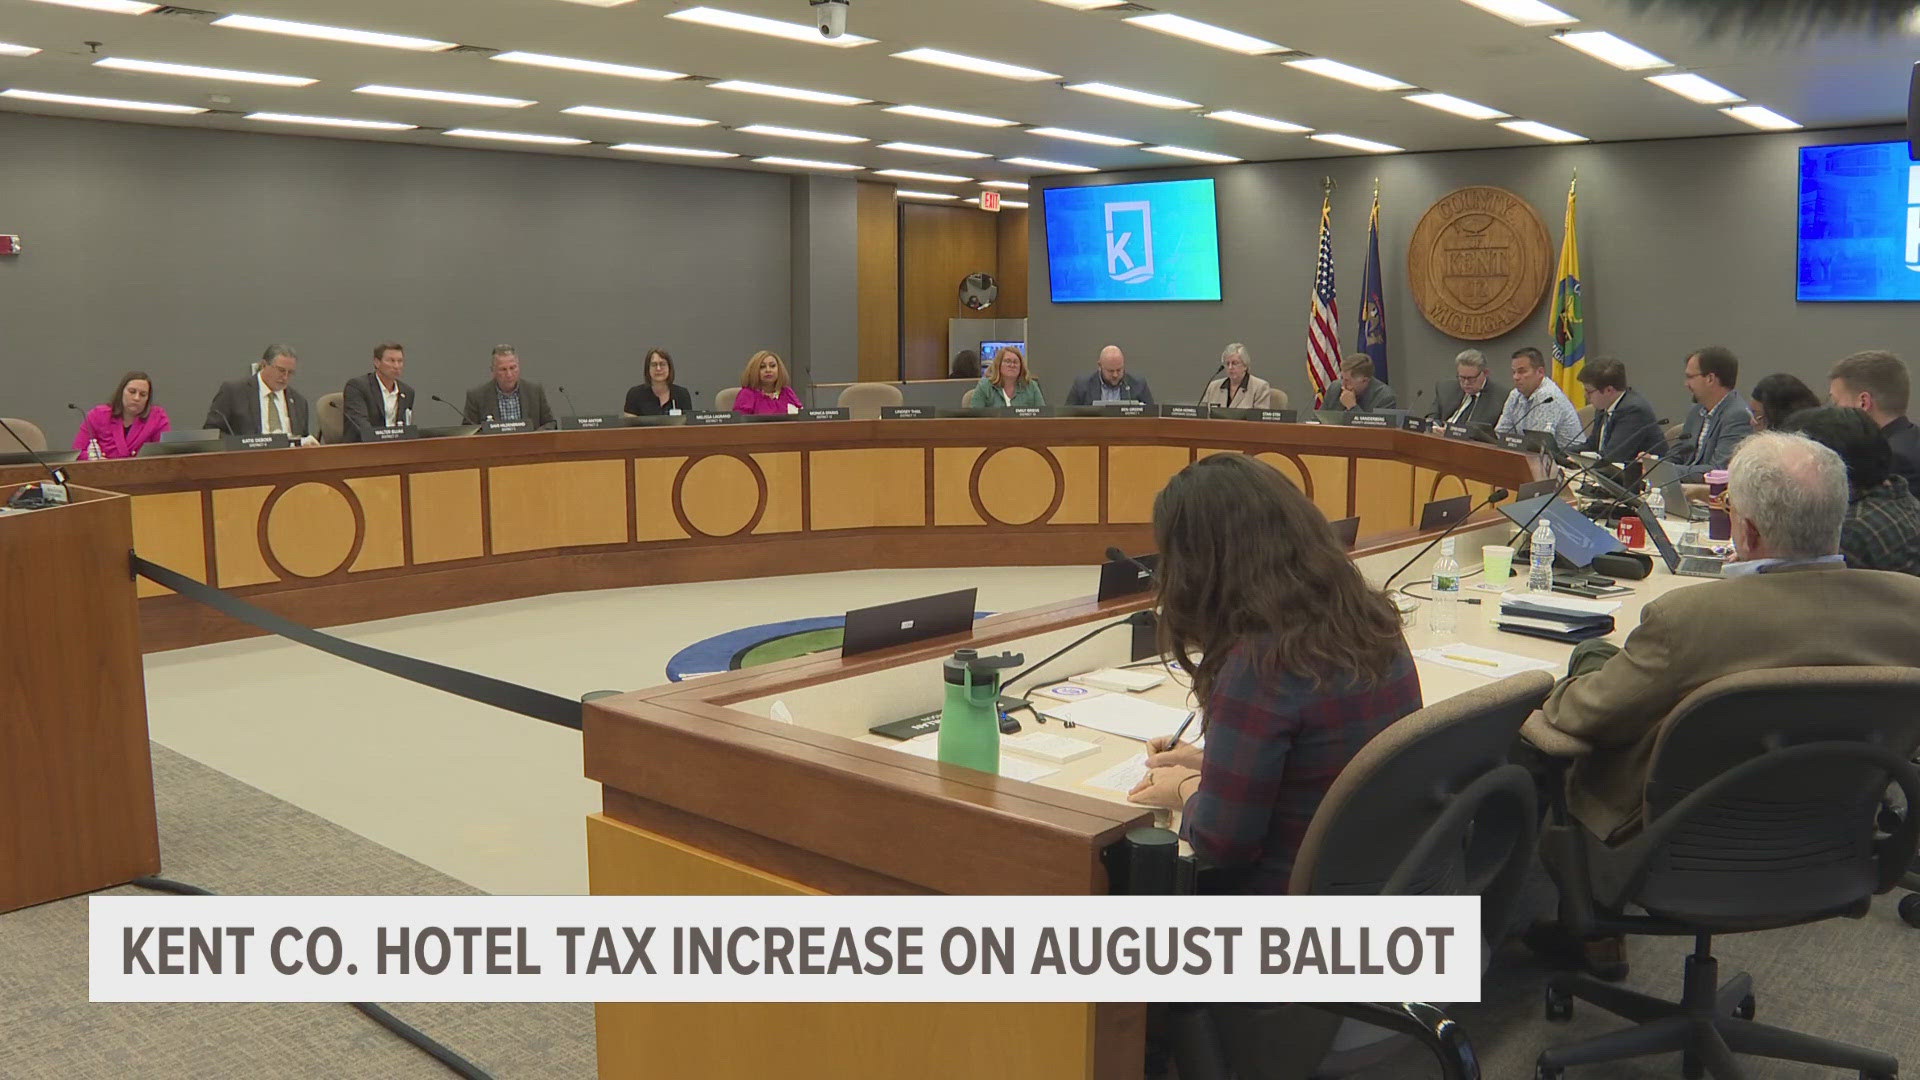 During public comment, a majority of residents spoke in favor of the tax increase, which would help fund major projects like a soccer stadium and amphitheater.